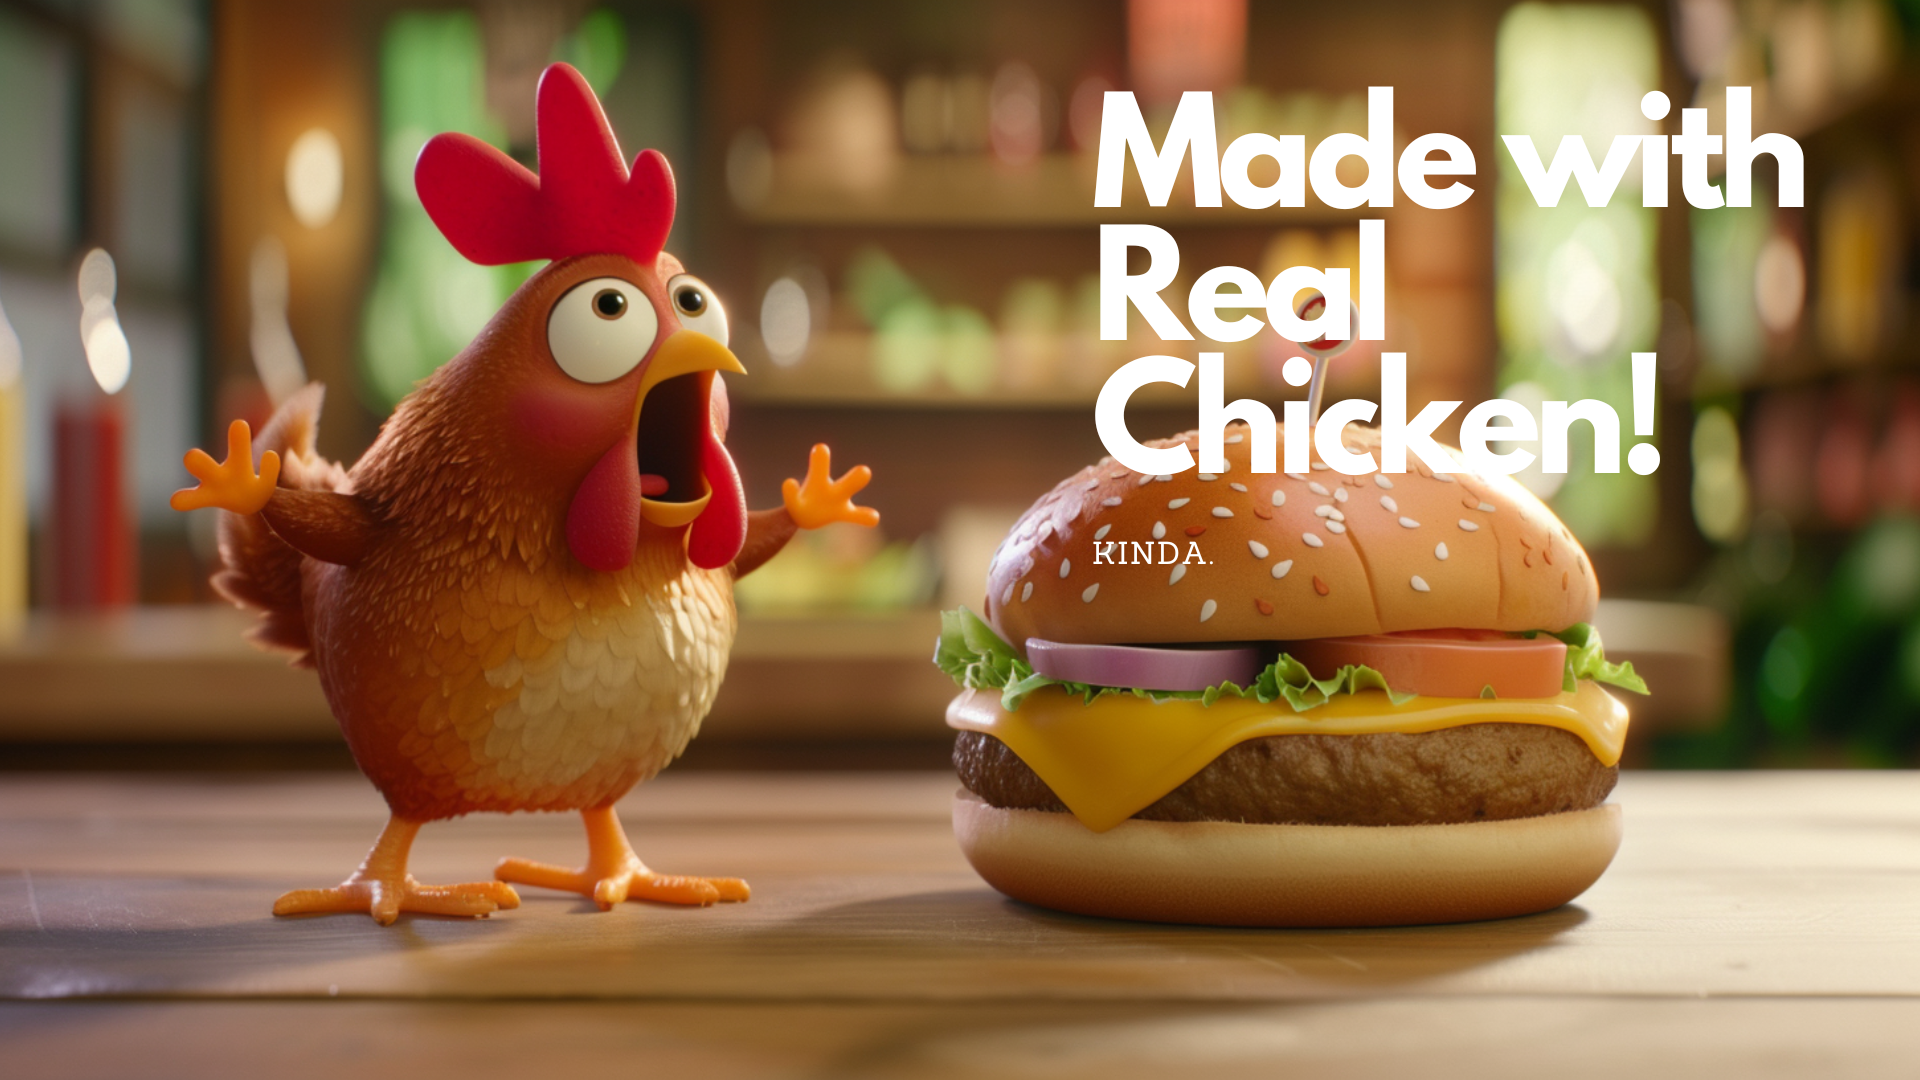 Promotional banner featuring an animated chicken next to a burger, with text 'Made with Real Chicken! Kinda.'